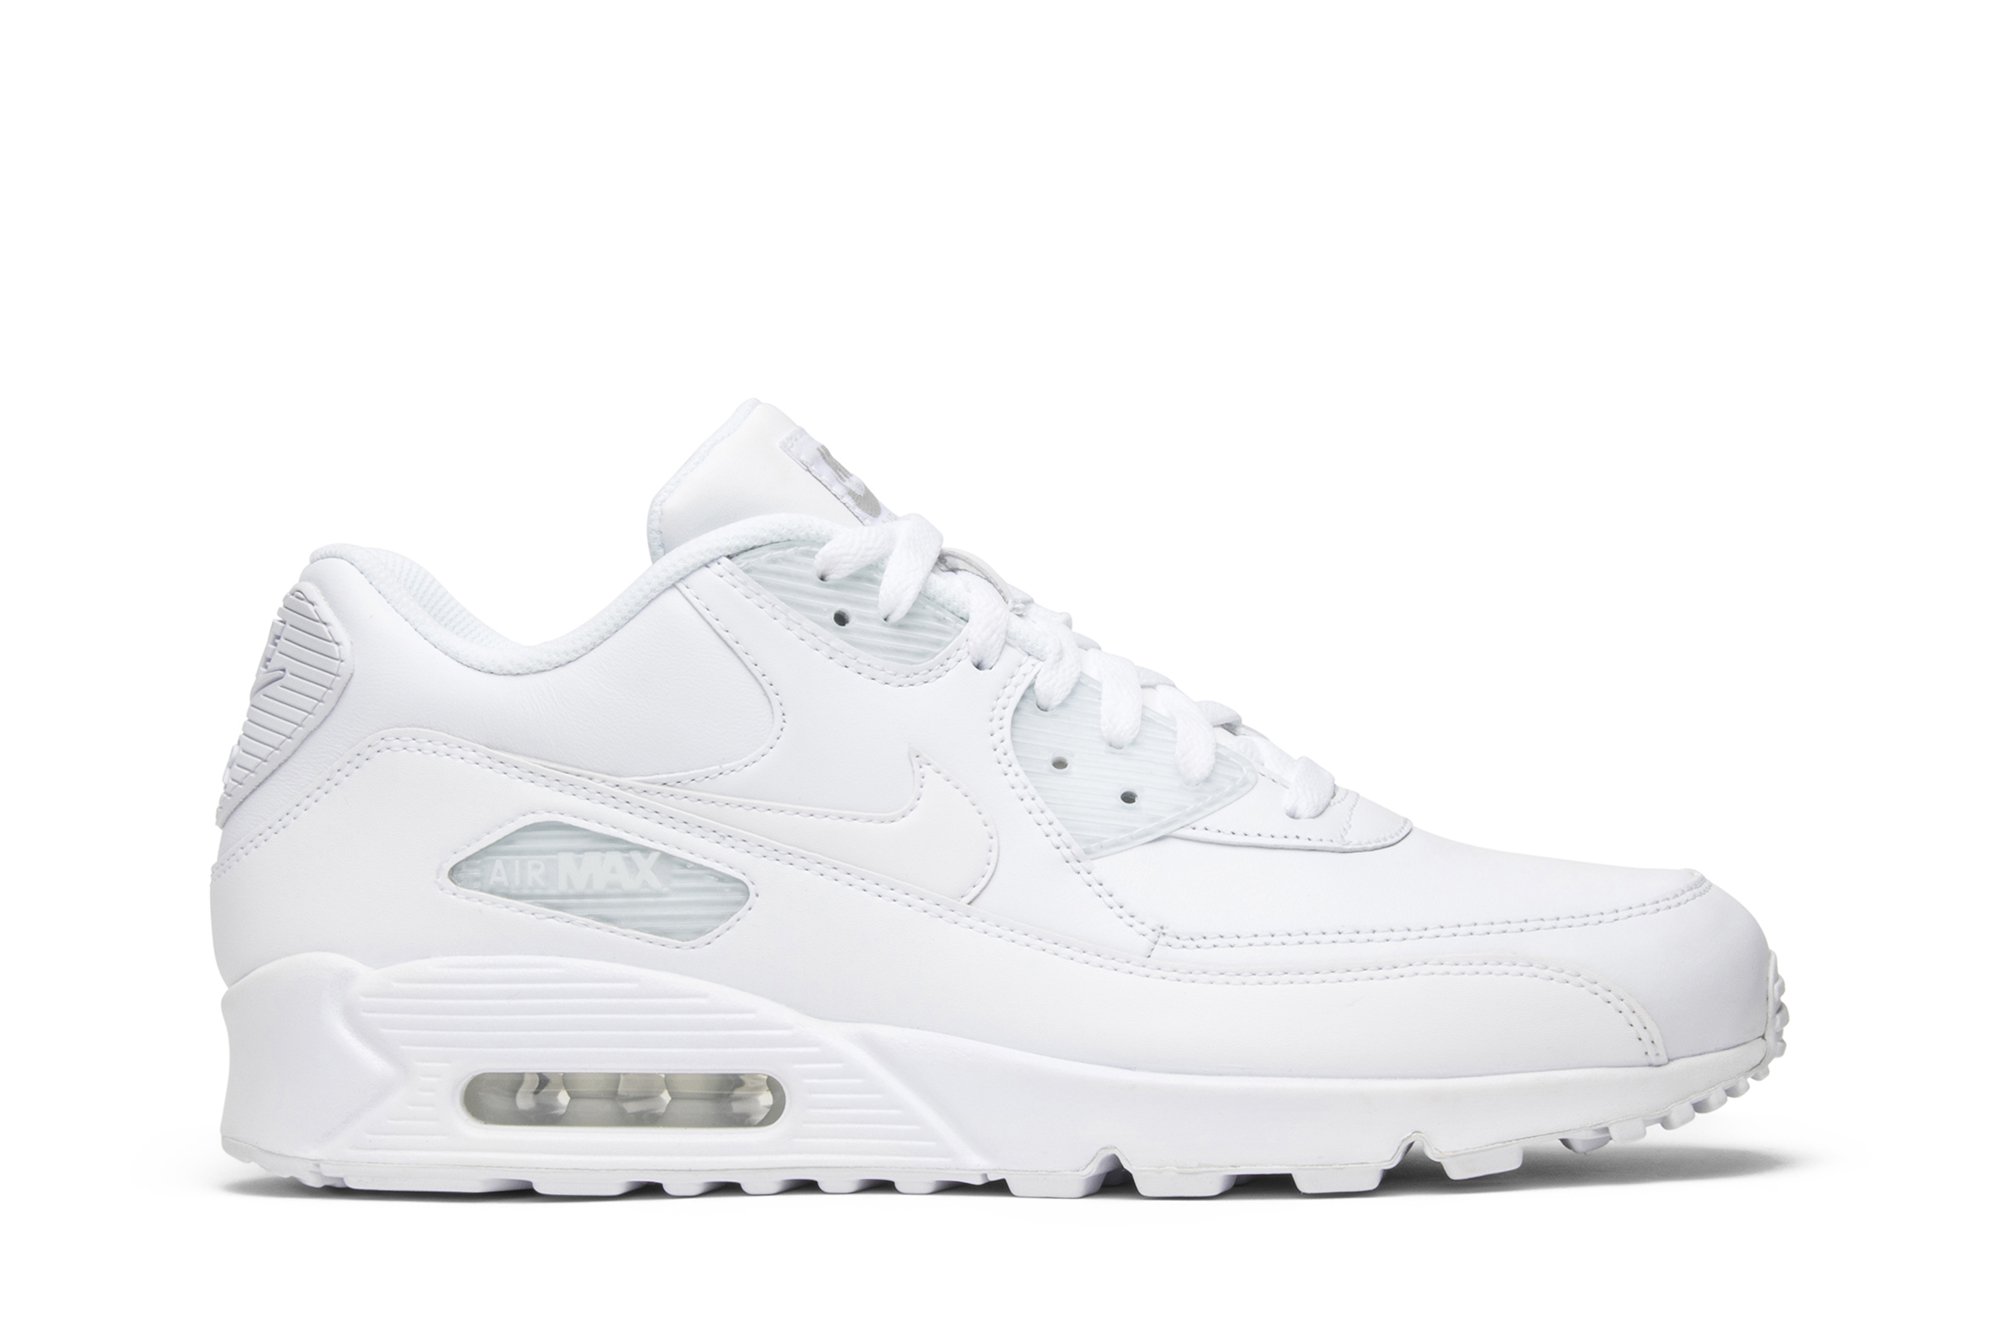 Buy Air Max 90 'White Leather' - 302519 113 - White | GOAT